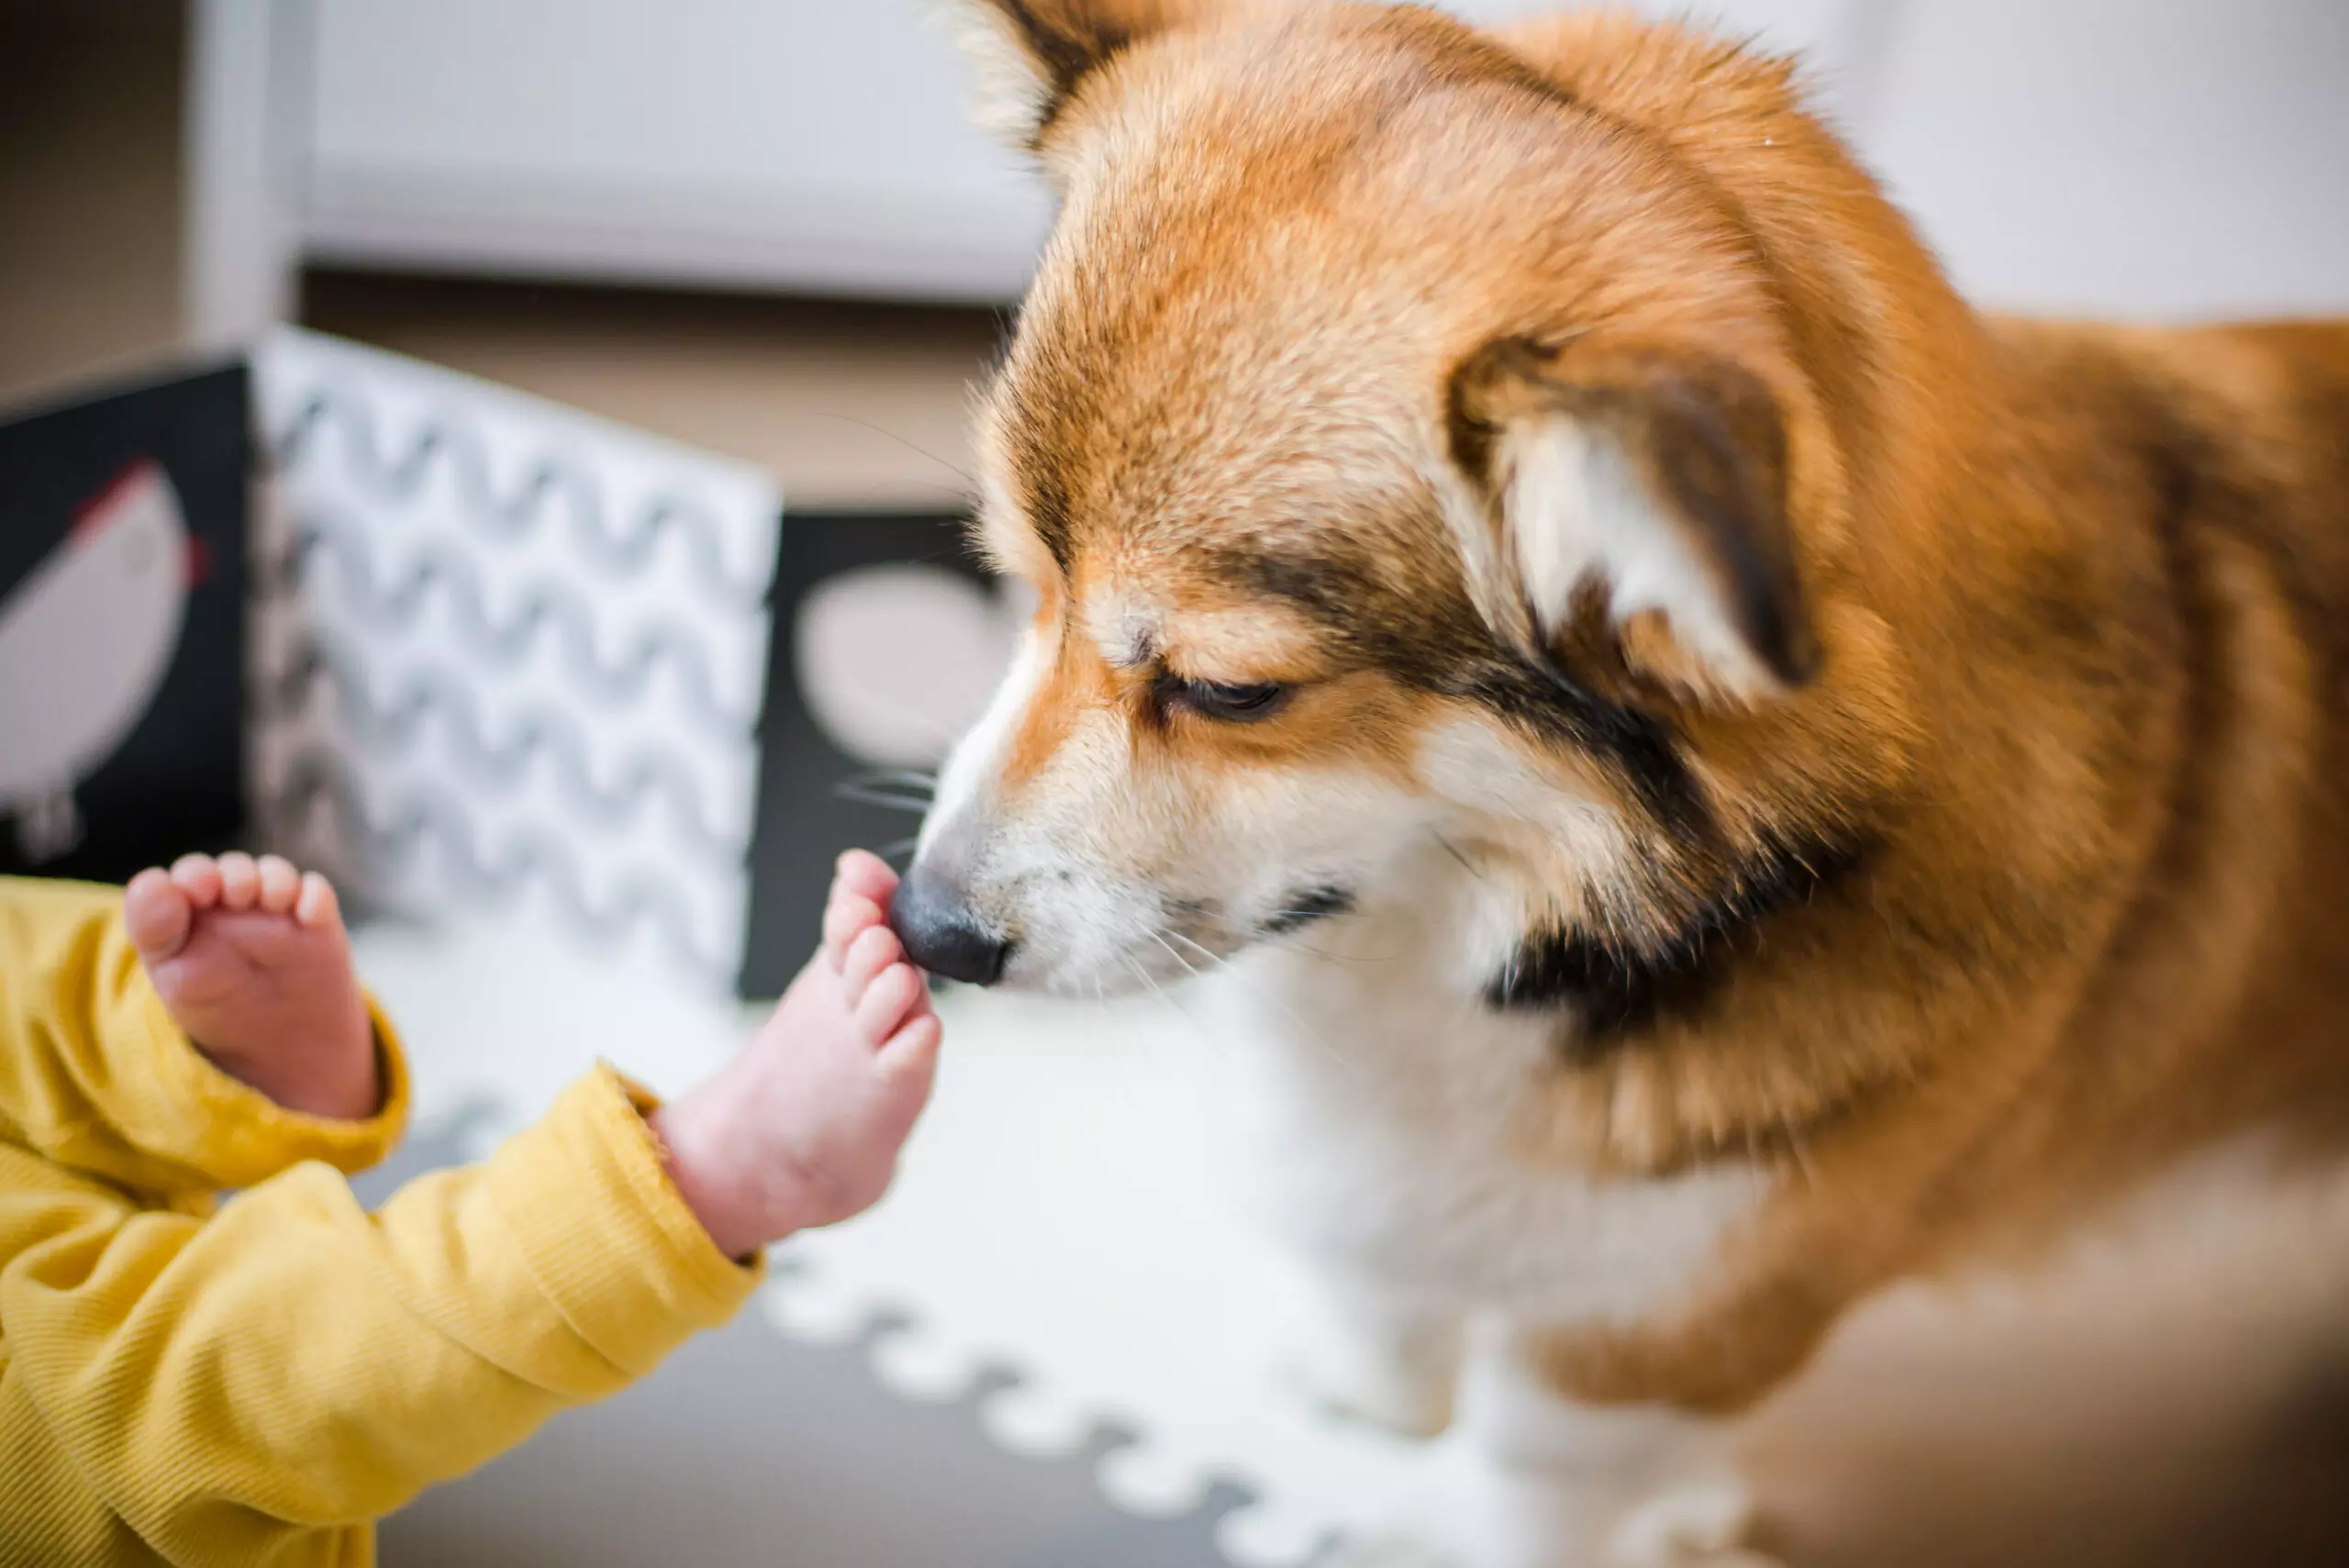 Scent dogs can detect COVID more effectively than RT-PCR: Study